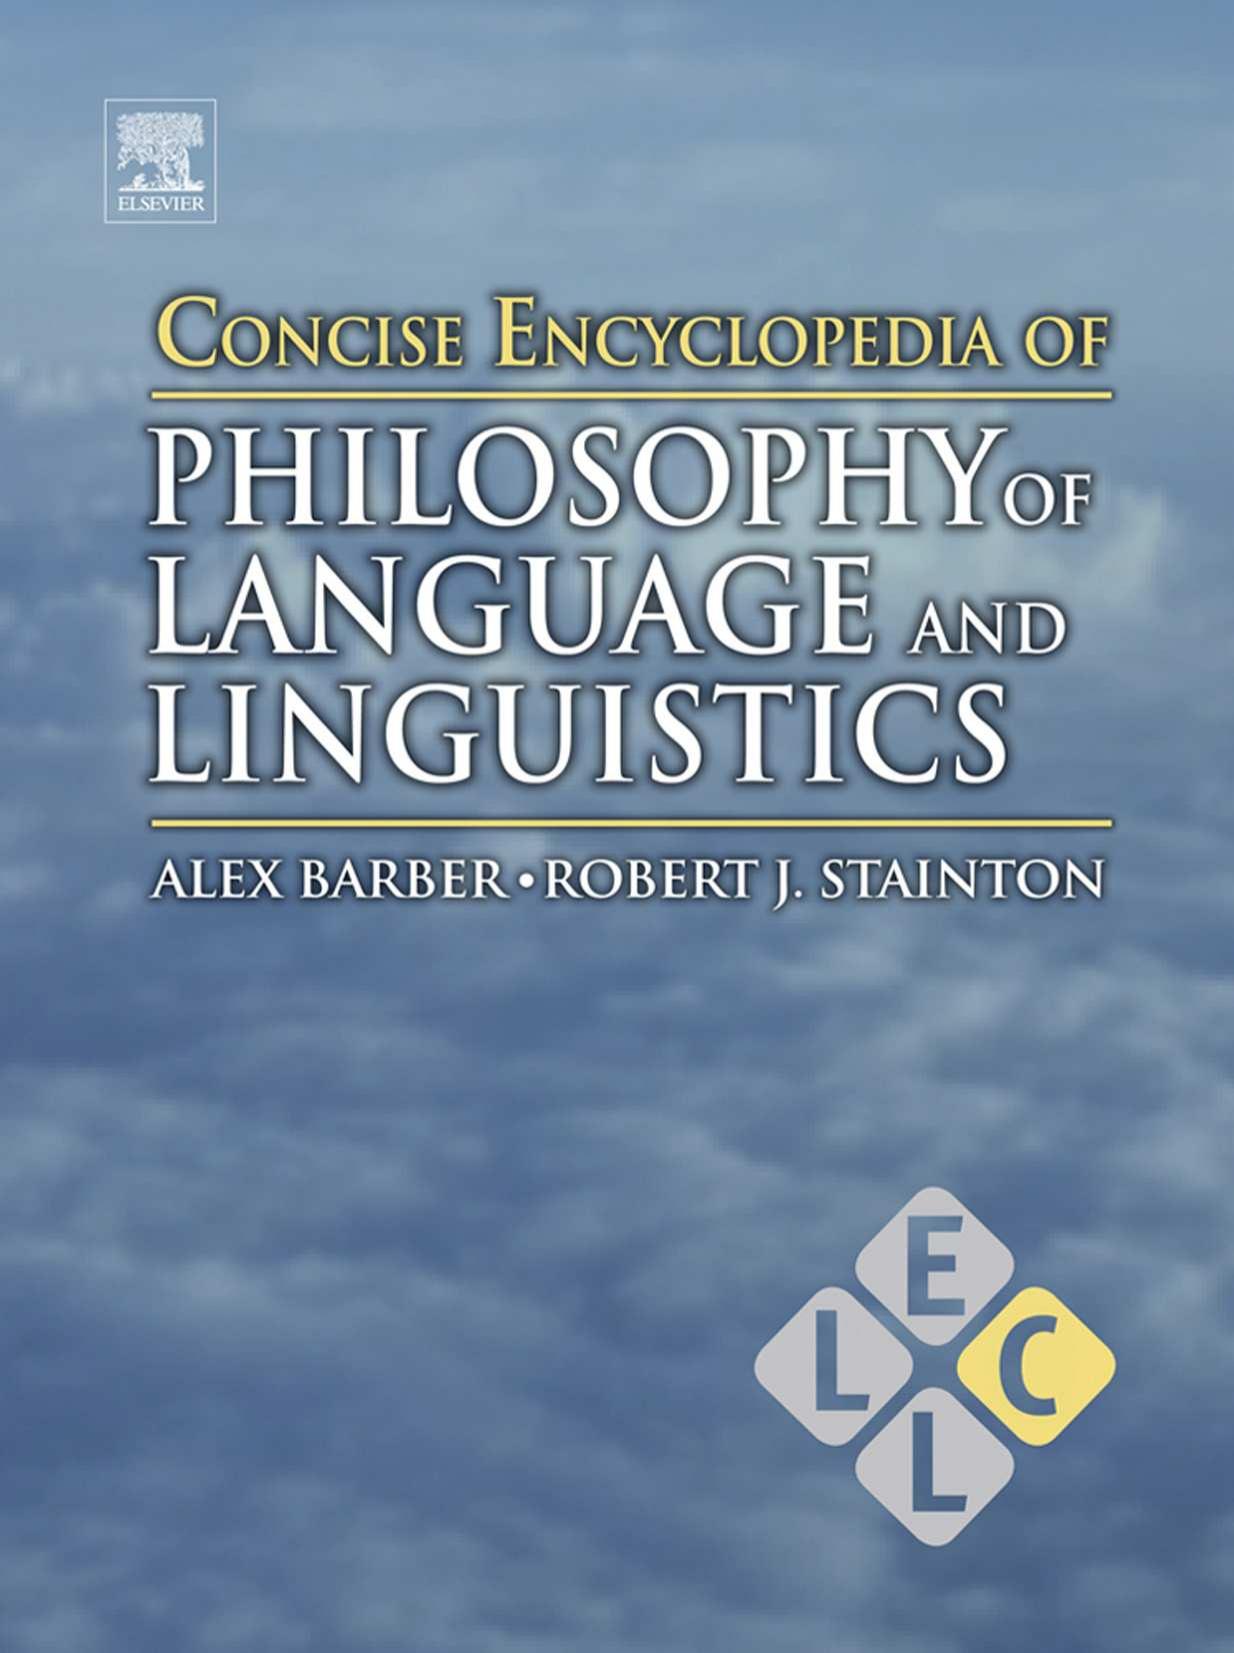 Concise Encyclopedia of Philosophy of Language and Linguistics